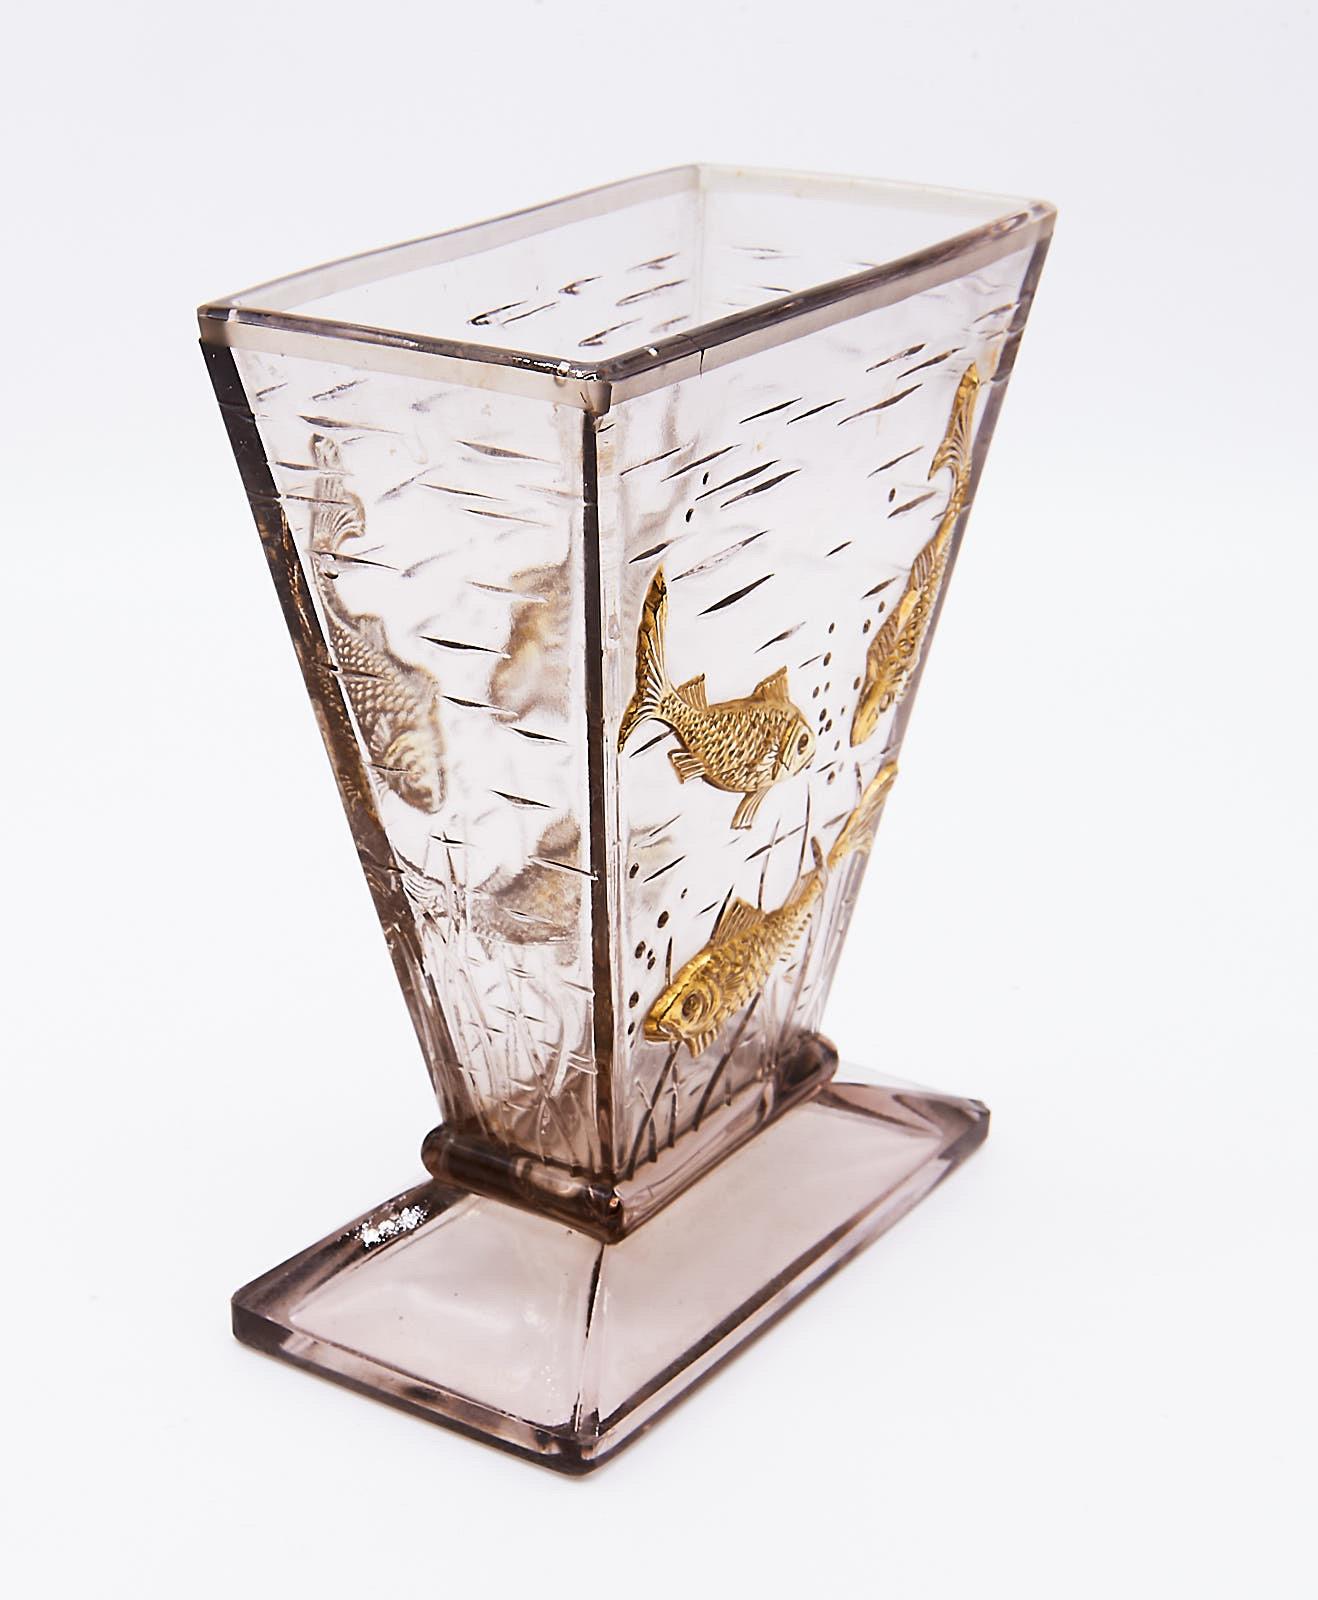 A scarce rectangular funnel form glass vase on a rising base. The front and back panels are moulded with high relief gilt decorated fish - the eyes are left clear - swimming amongst weeds, with additional water ripples and bubbles on all sides.